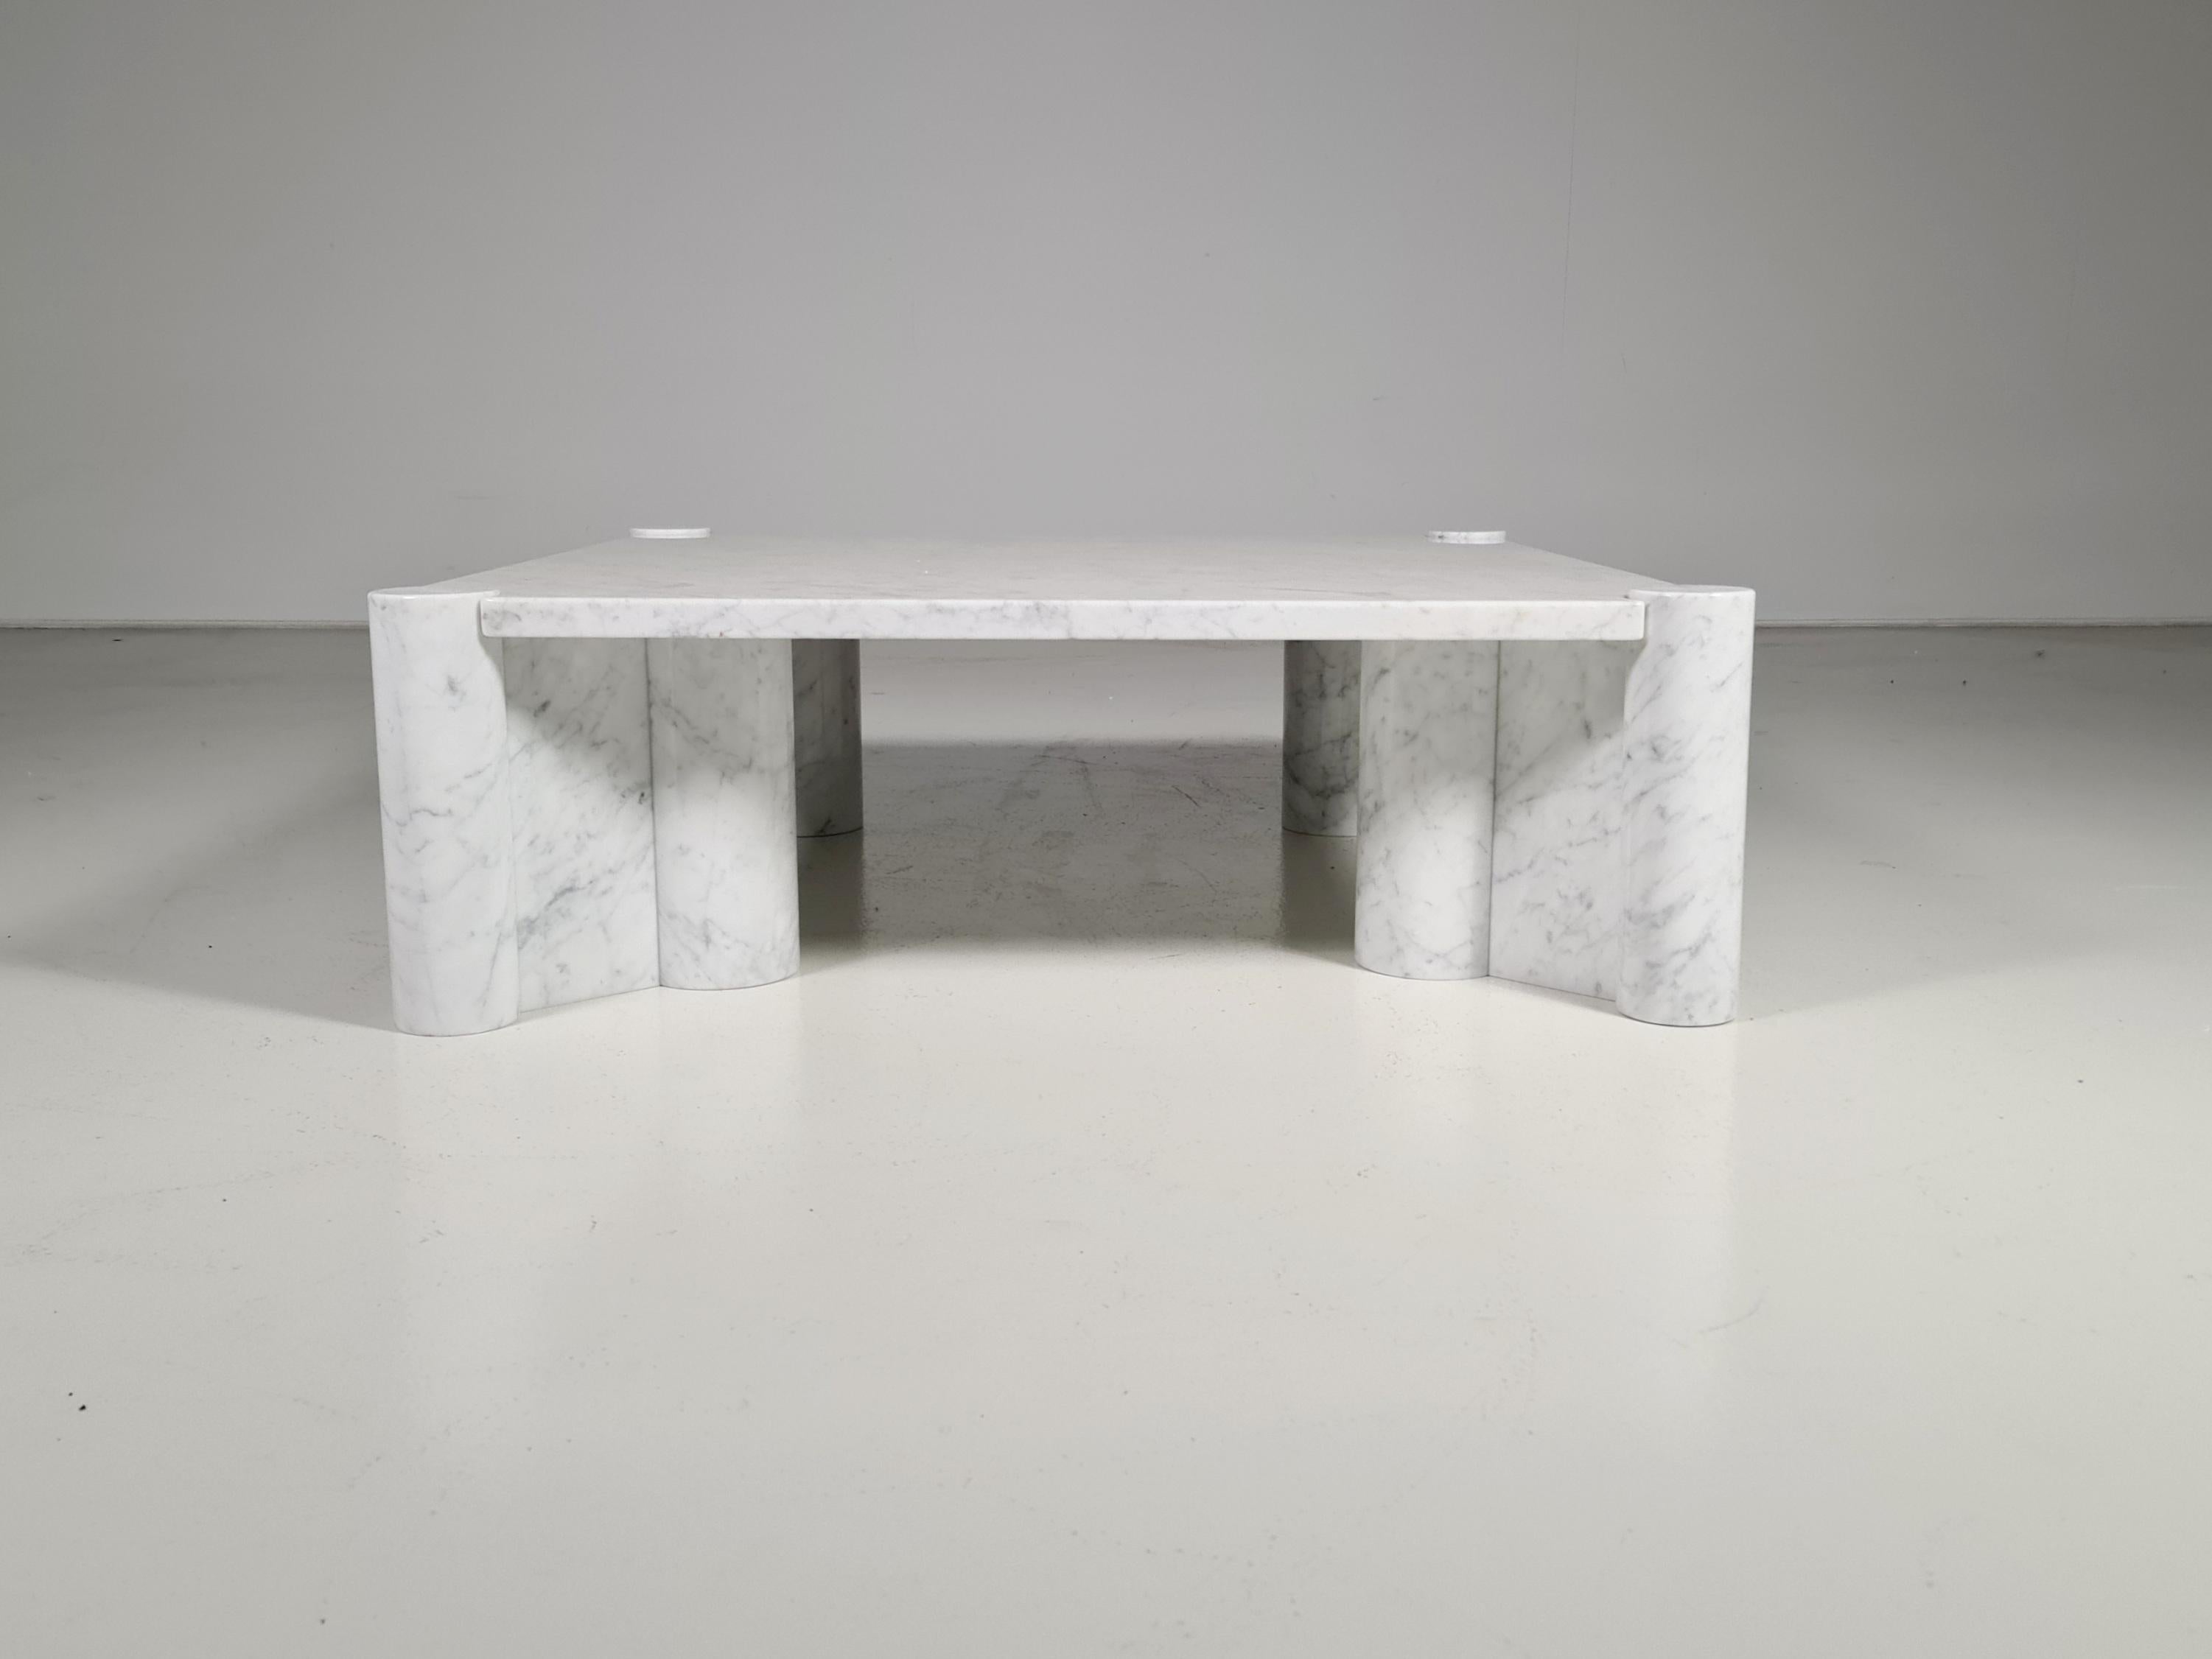 Jumbo coffee table in Carrara marble, designed by Gae Aulenti for Knoll International in the 1960s. Square table top with four cylindrical cluster legs. The table top is a bit yellowed over the years. Some small signs of use. No damages.